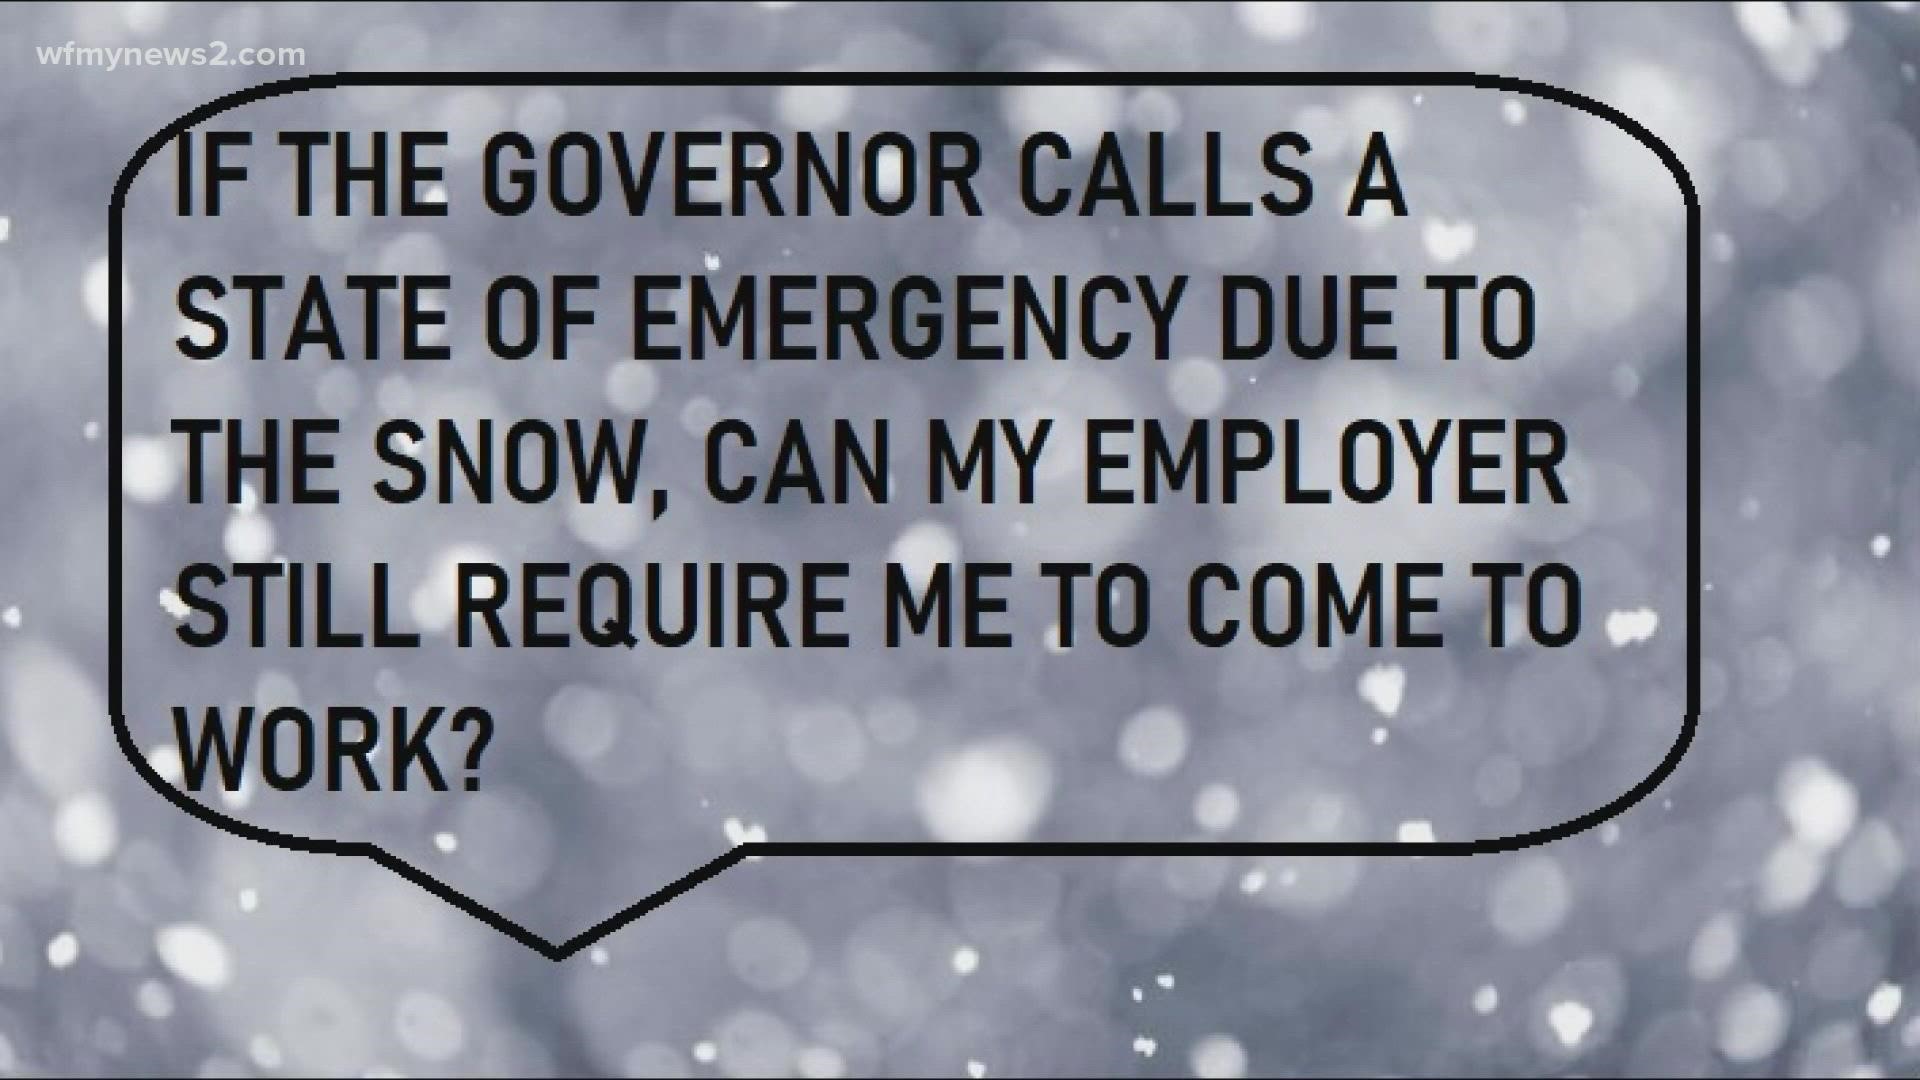 If the governor issues a state of emergency, like for snow, your employer can still make you go to work.